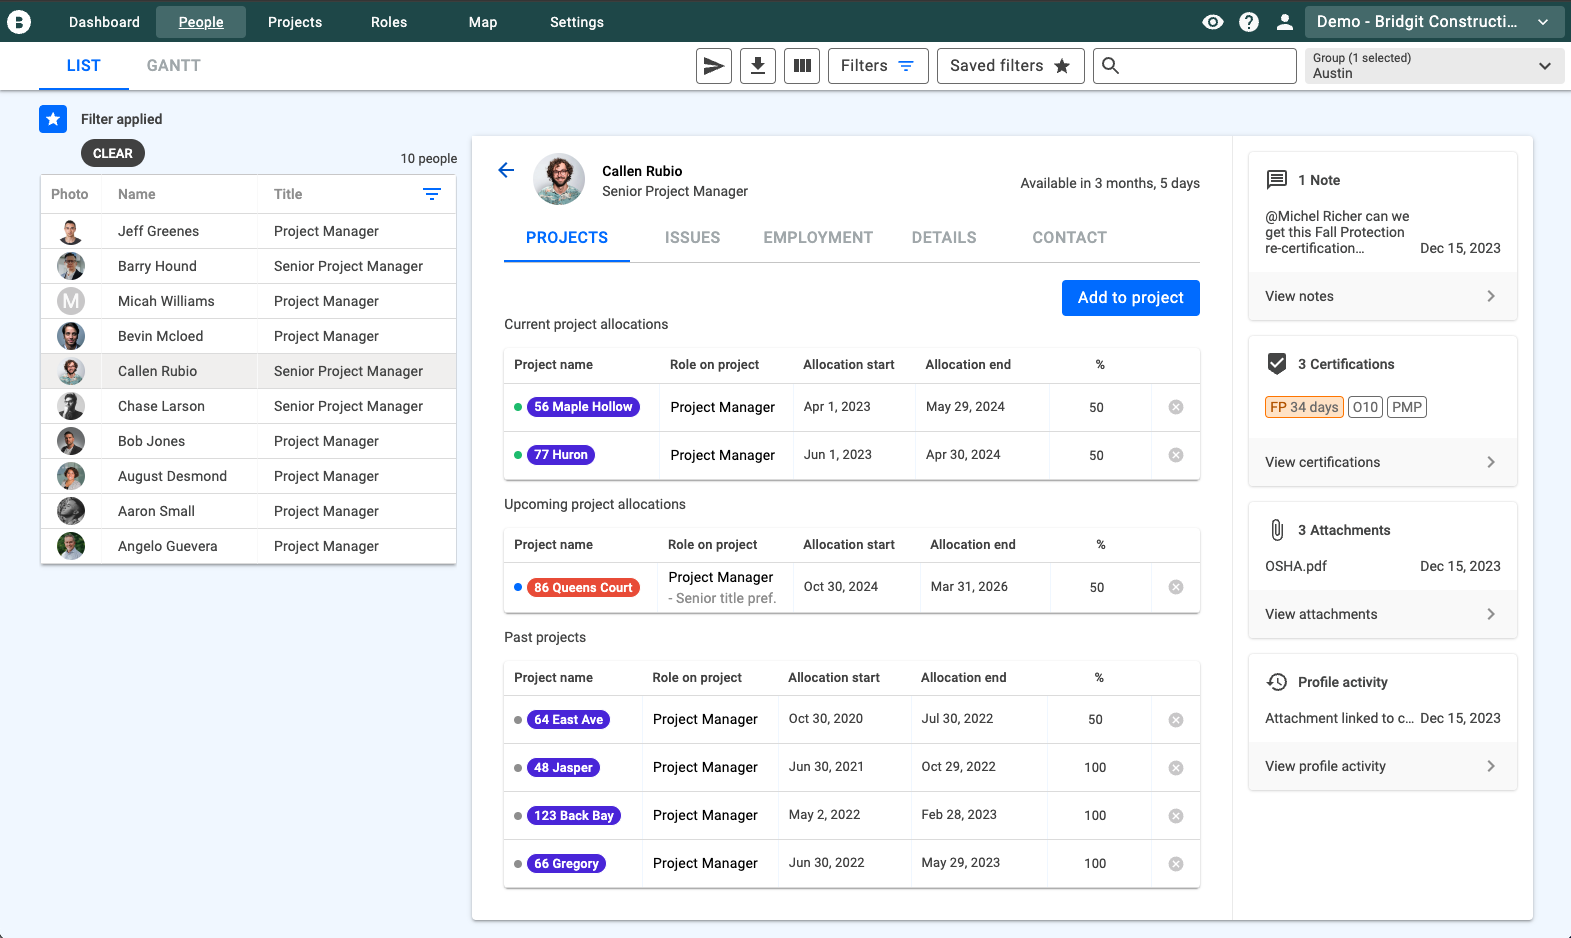 Detailed profiles for every team member means you can track full project histories, skills, experience, and any number of custom fields you wish to track. You can even add certifications and track expiration dates to ensure you're always compliant.